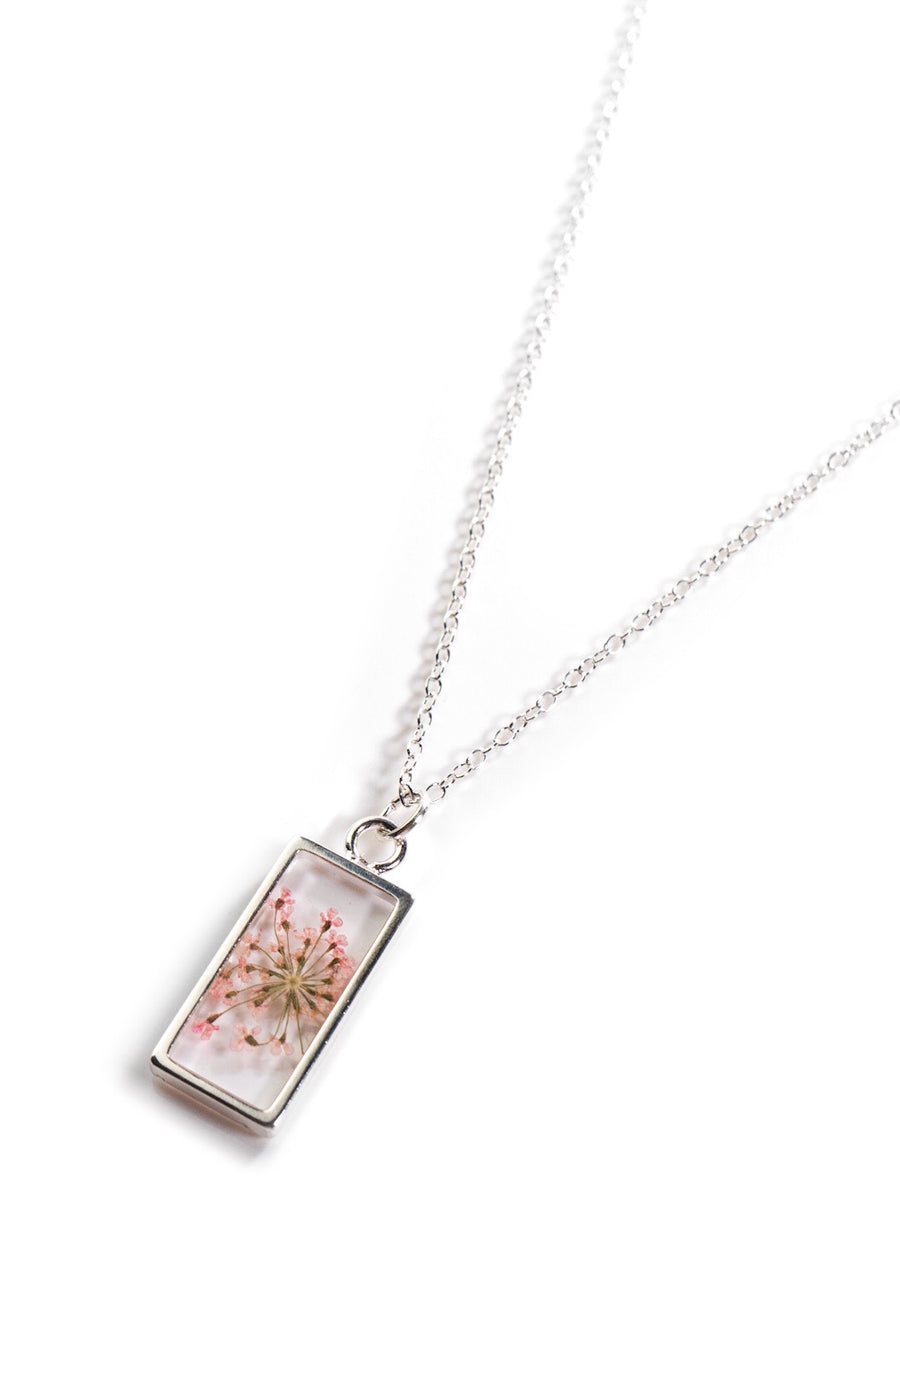 Pink Queen Anne's Lace Clear Rectangle Pendant SS by Lace & Pearls Jewelry